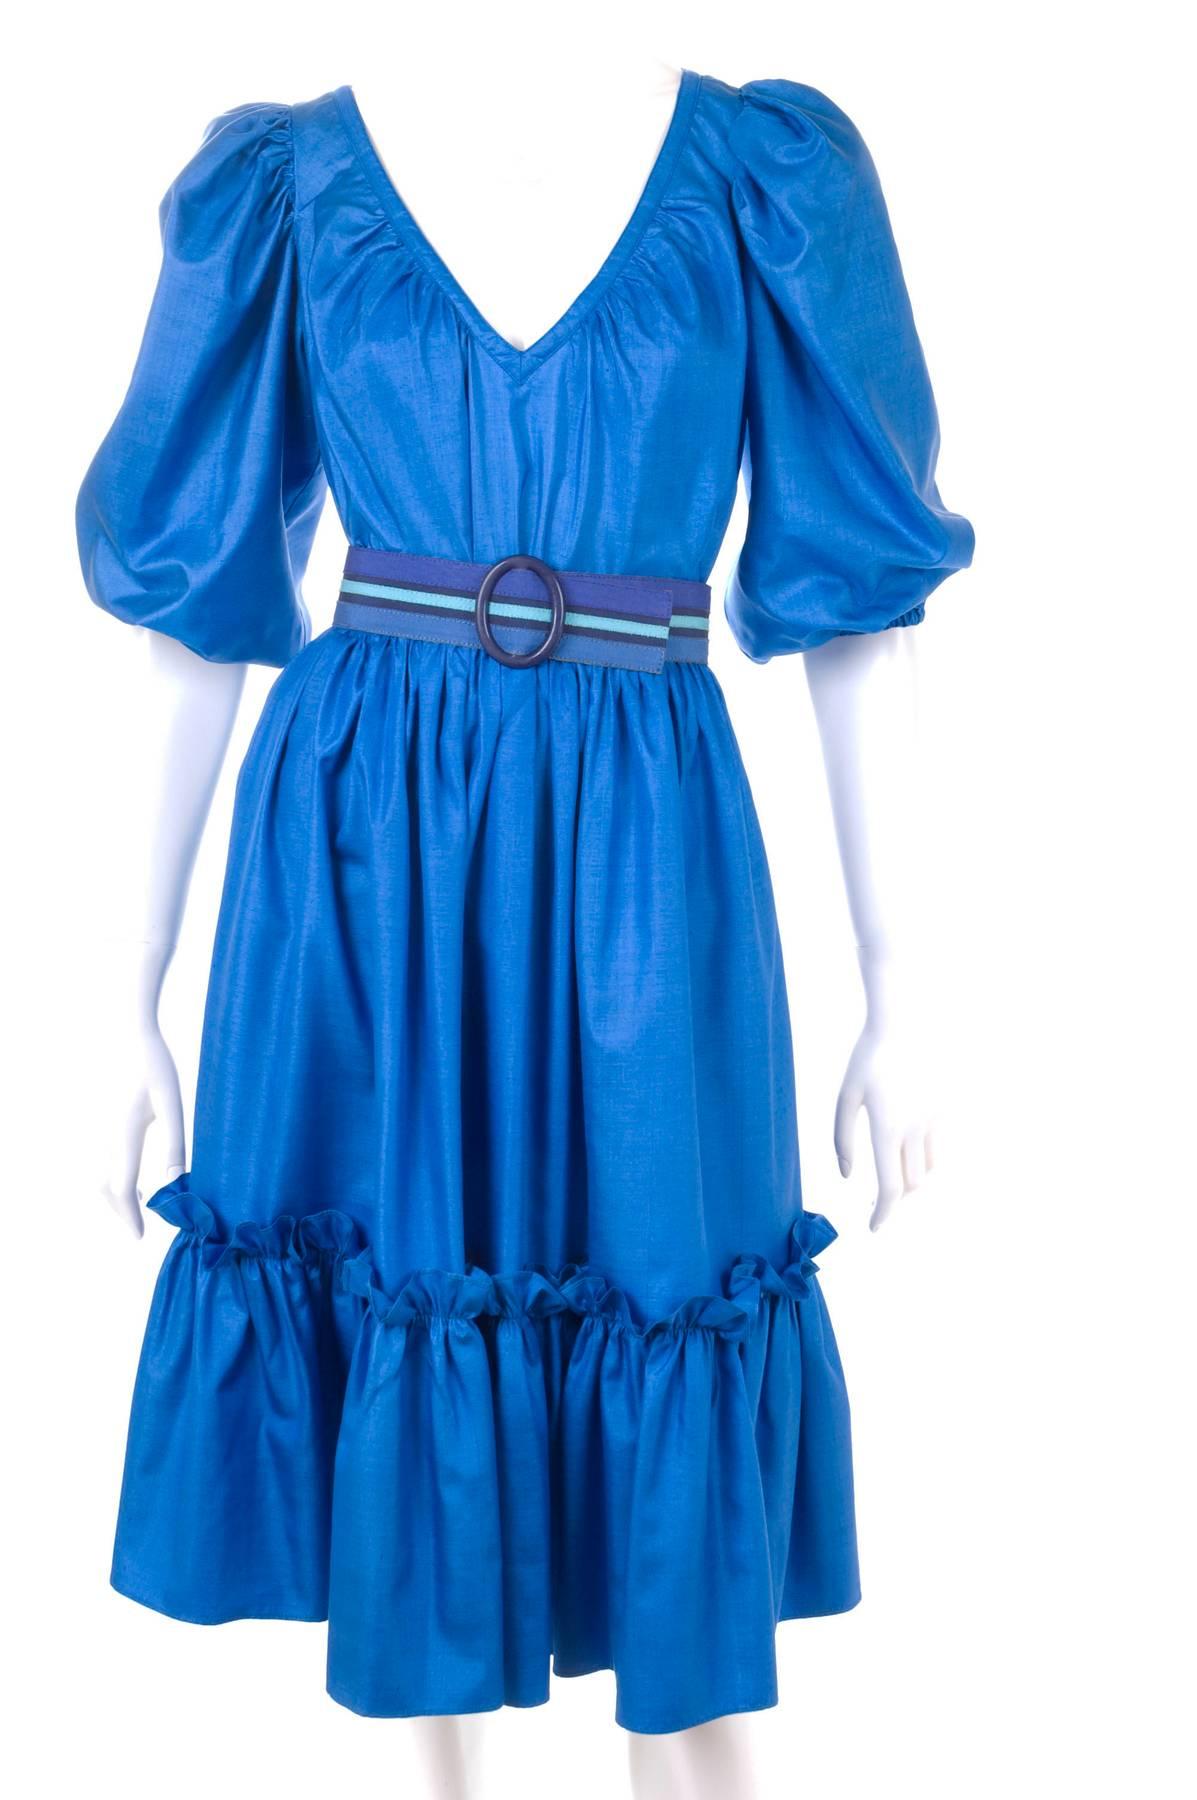 Yves Saint Laurent Vintage early 80's Gypsy Silk Ensemble in Royal-Blue.
The skirt with a ruffle hem line and pockets in the side seams. The blouse in slip-on style with elastic at the sleeves end.
The belt in 3 blue tones made of fabric and leather